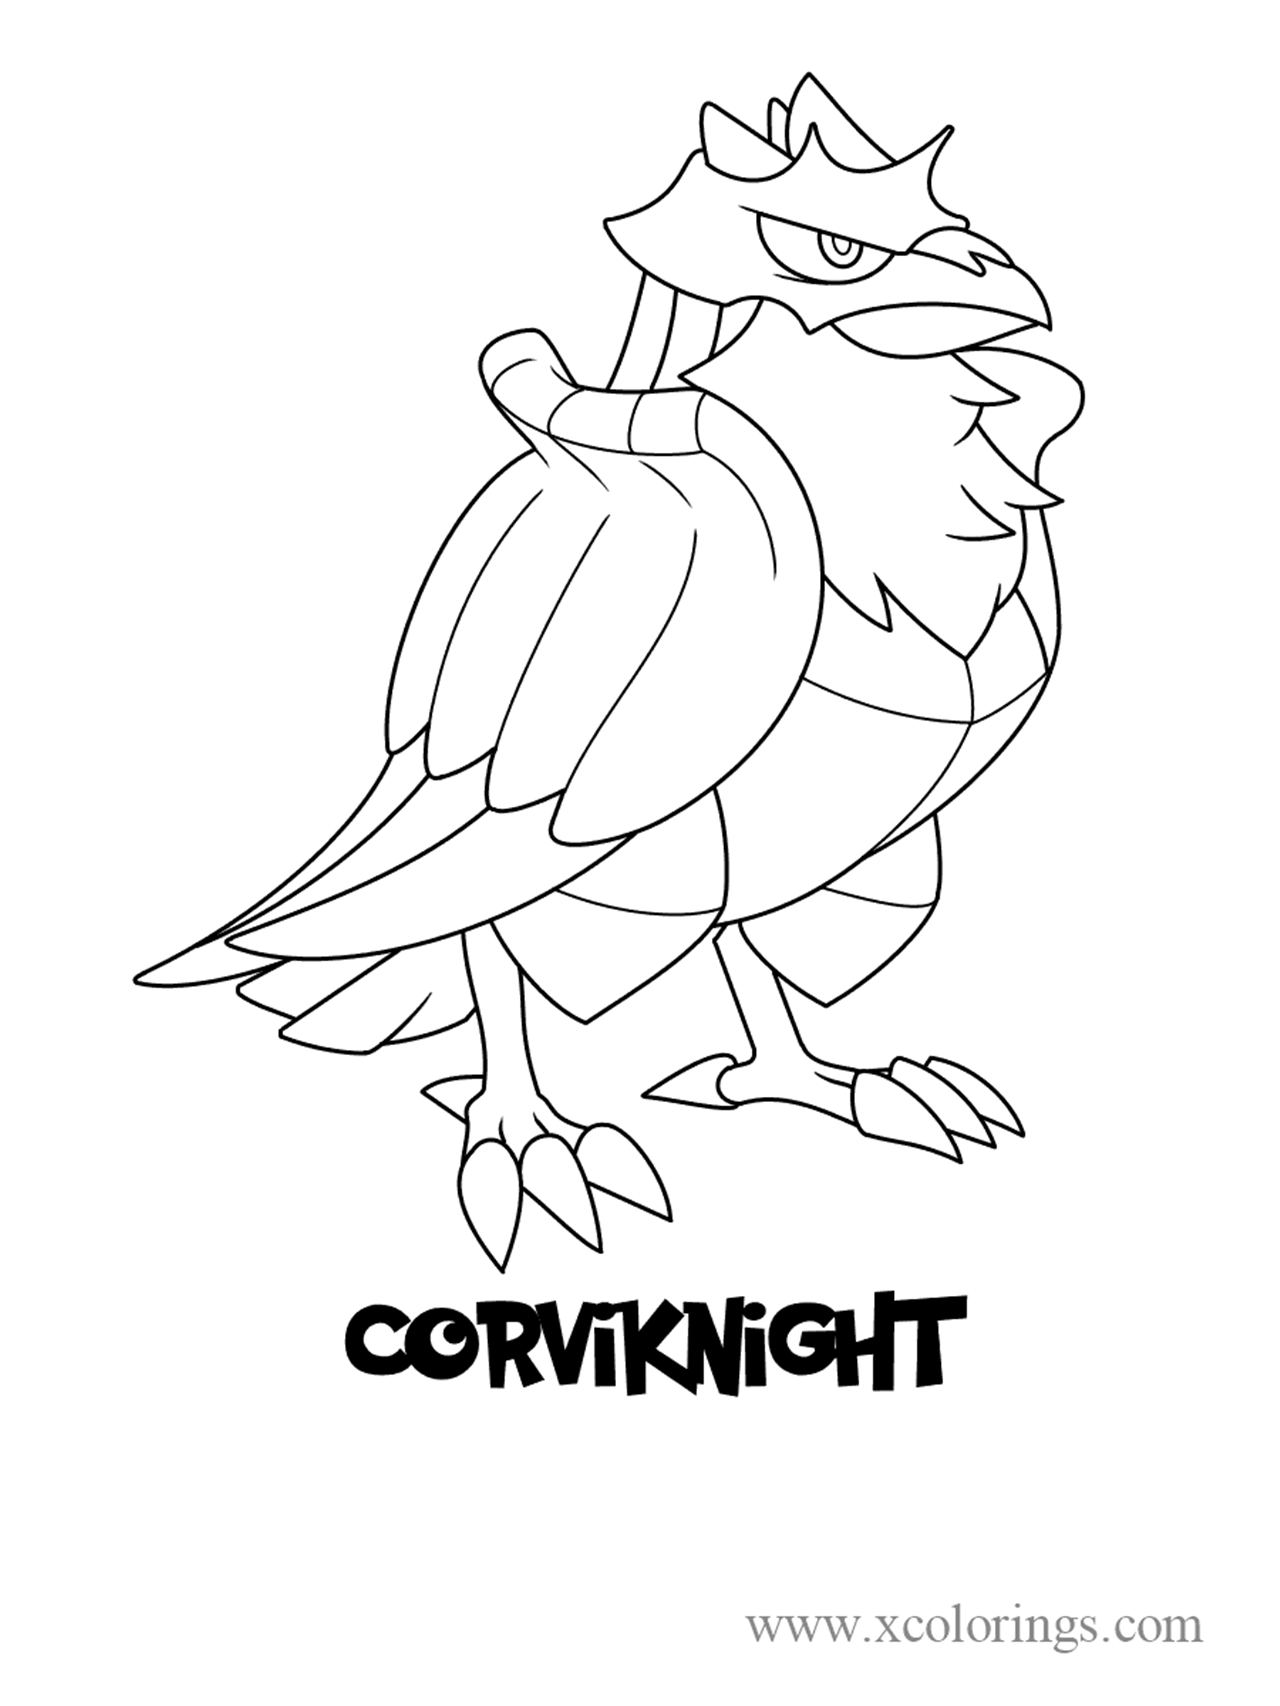 Free Pokemon sword and shield Corviknight Coloring Pages printable